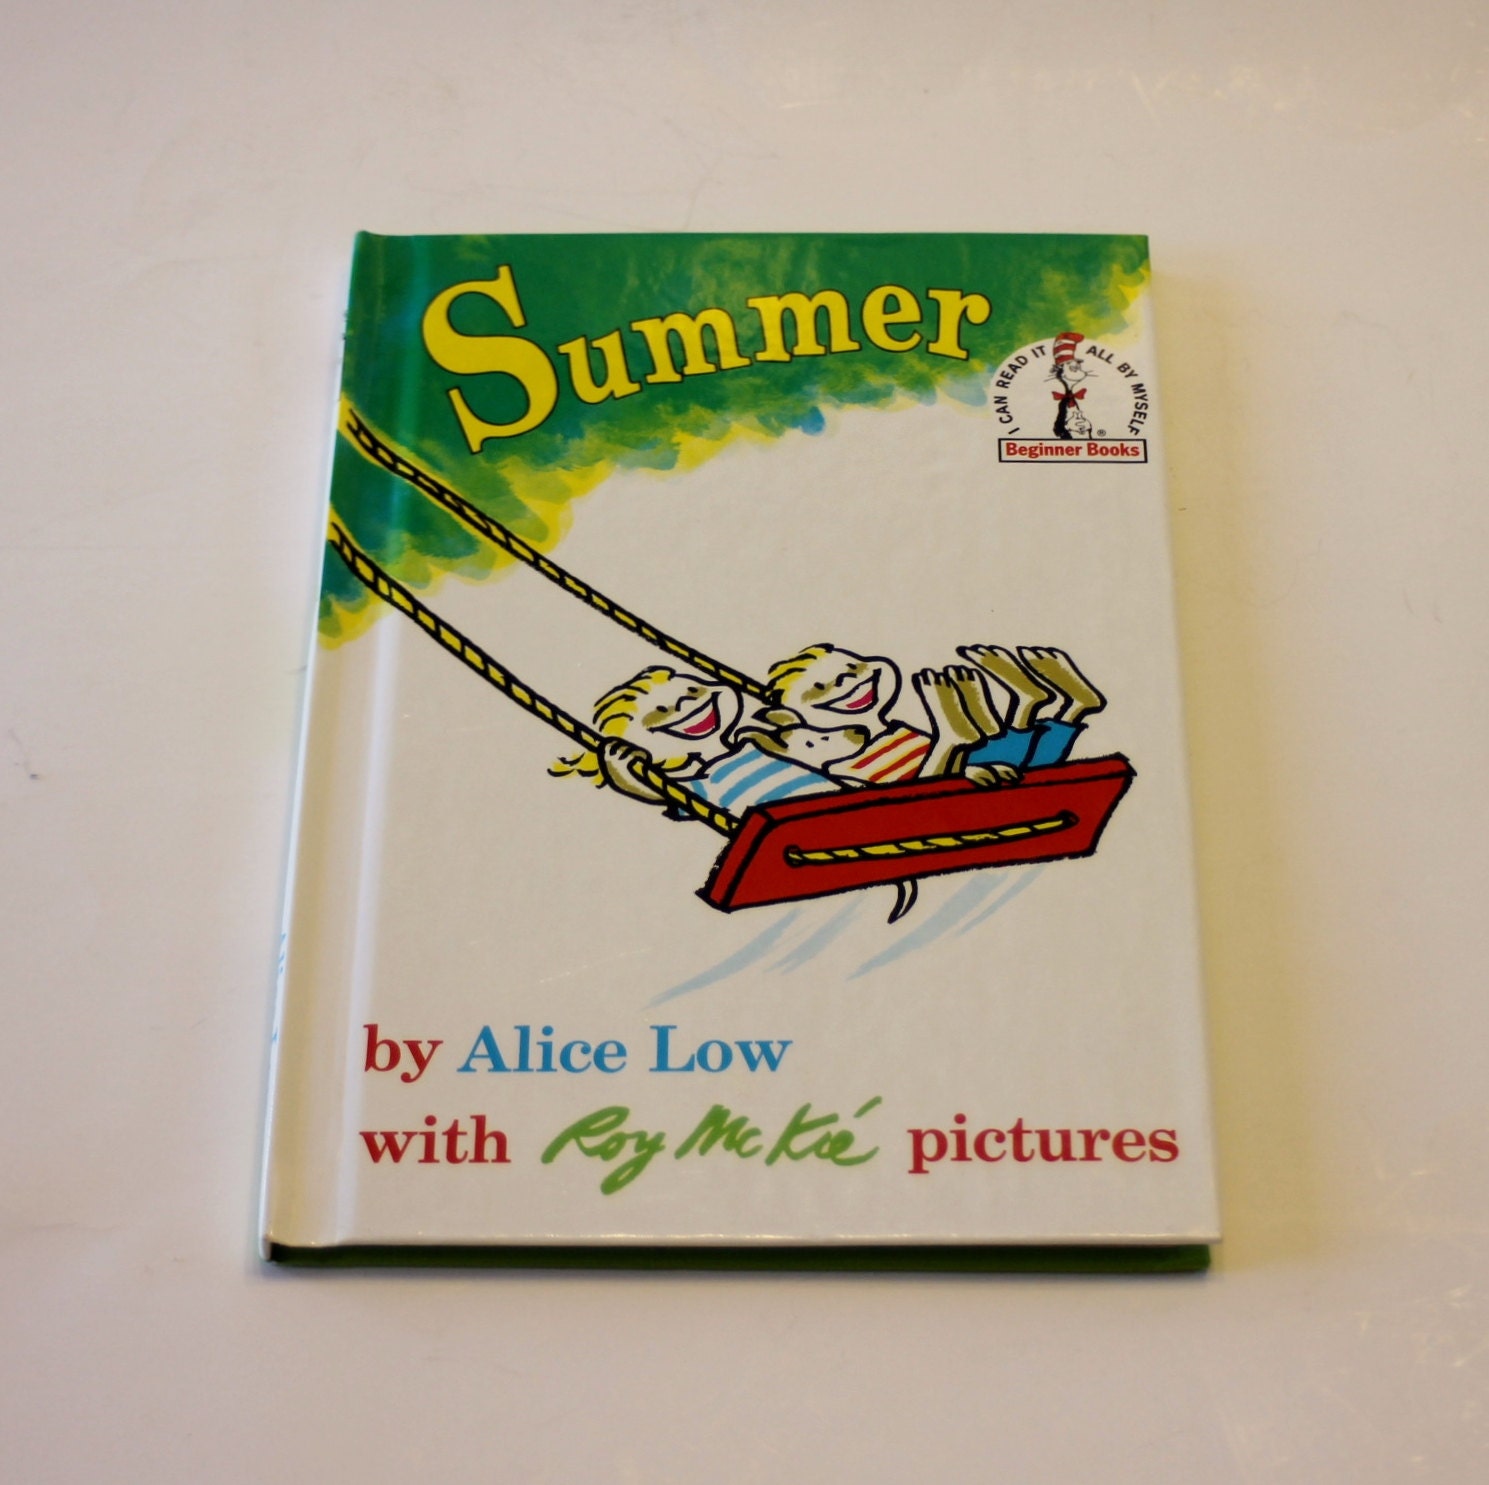 Summer by Alice Low with Roy McKie: I Can by MyForgottenTreasures